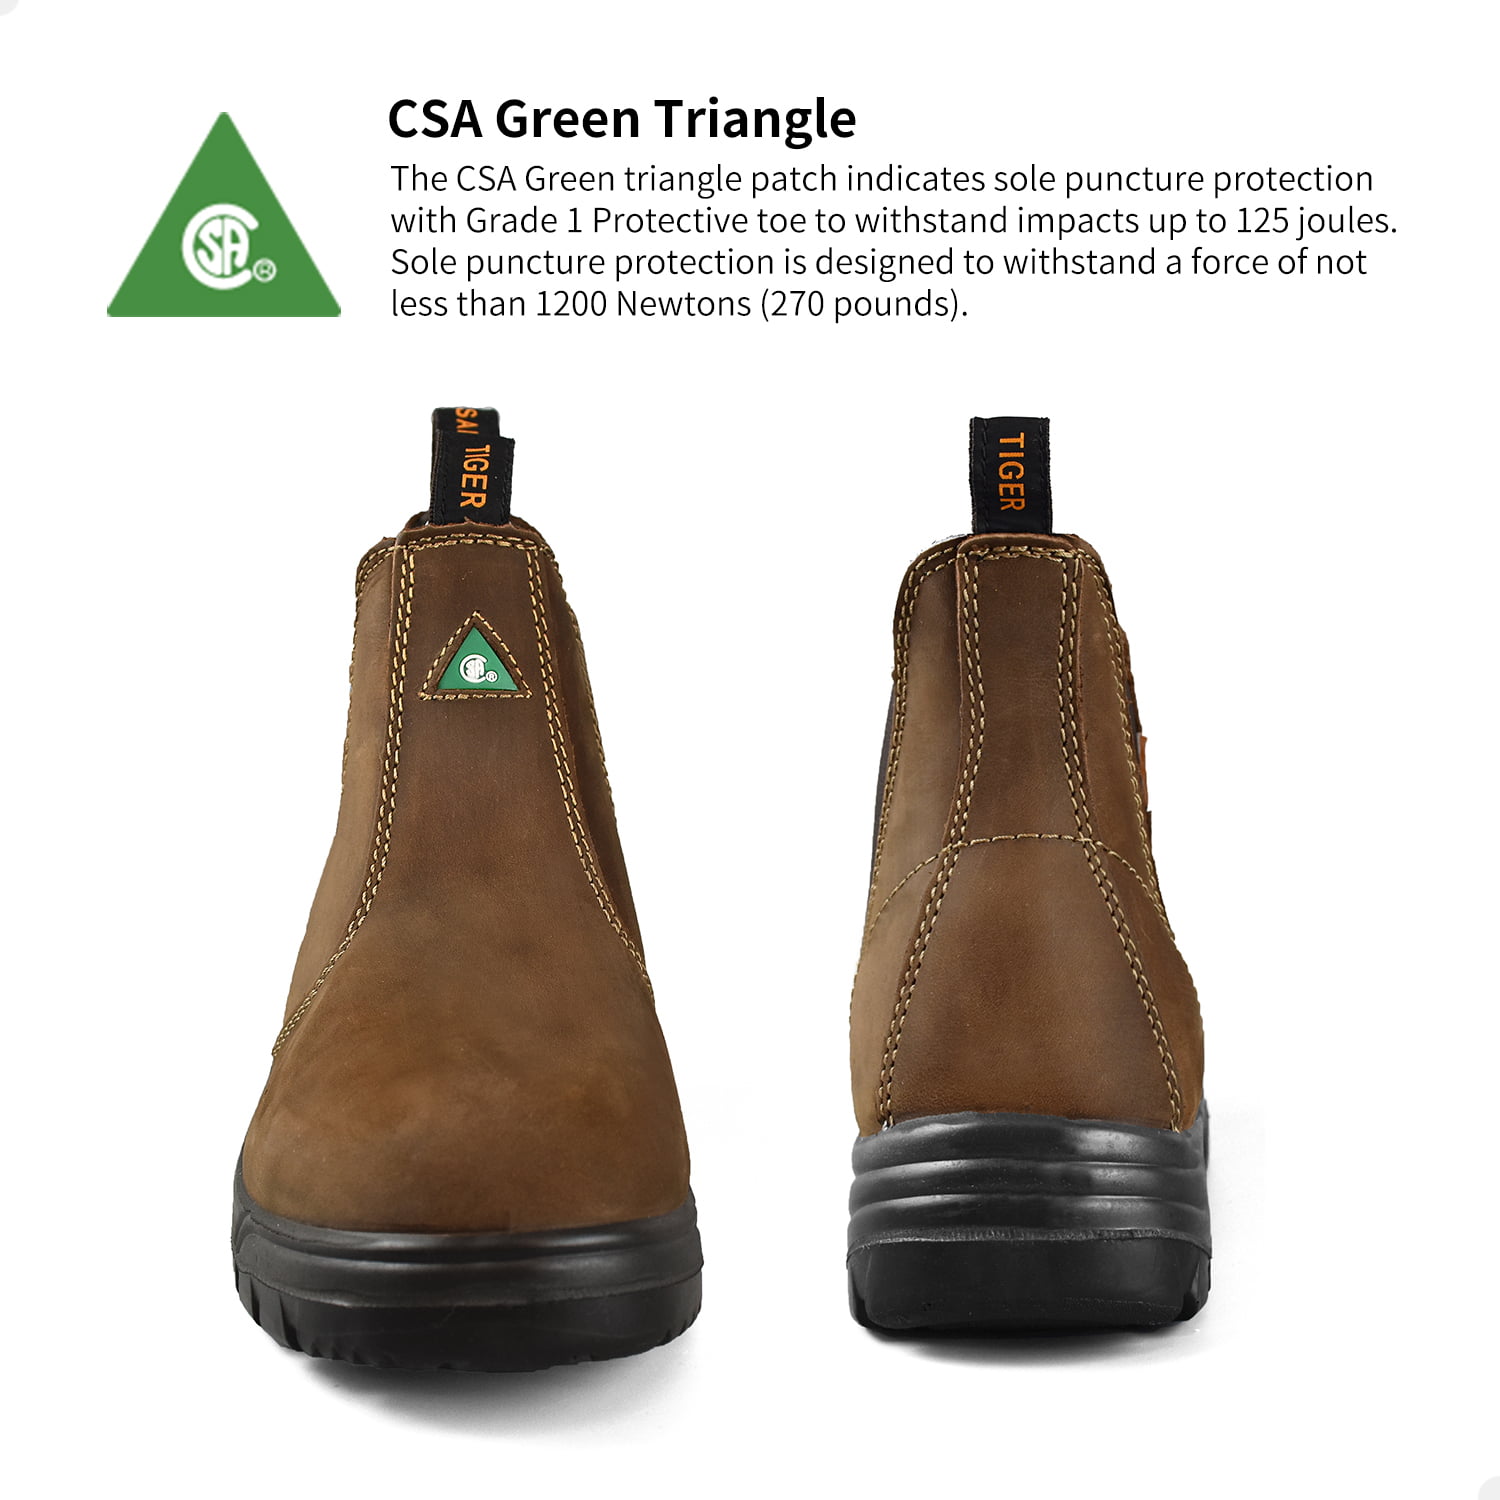 csa green triangle shoes